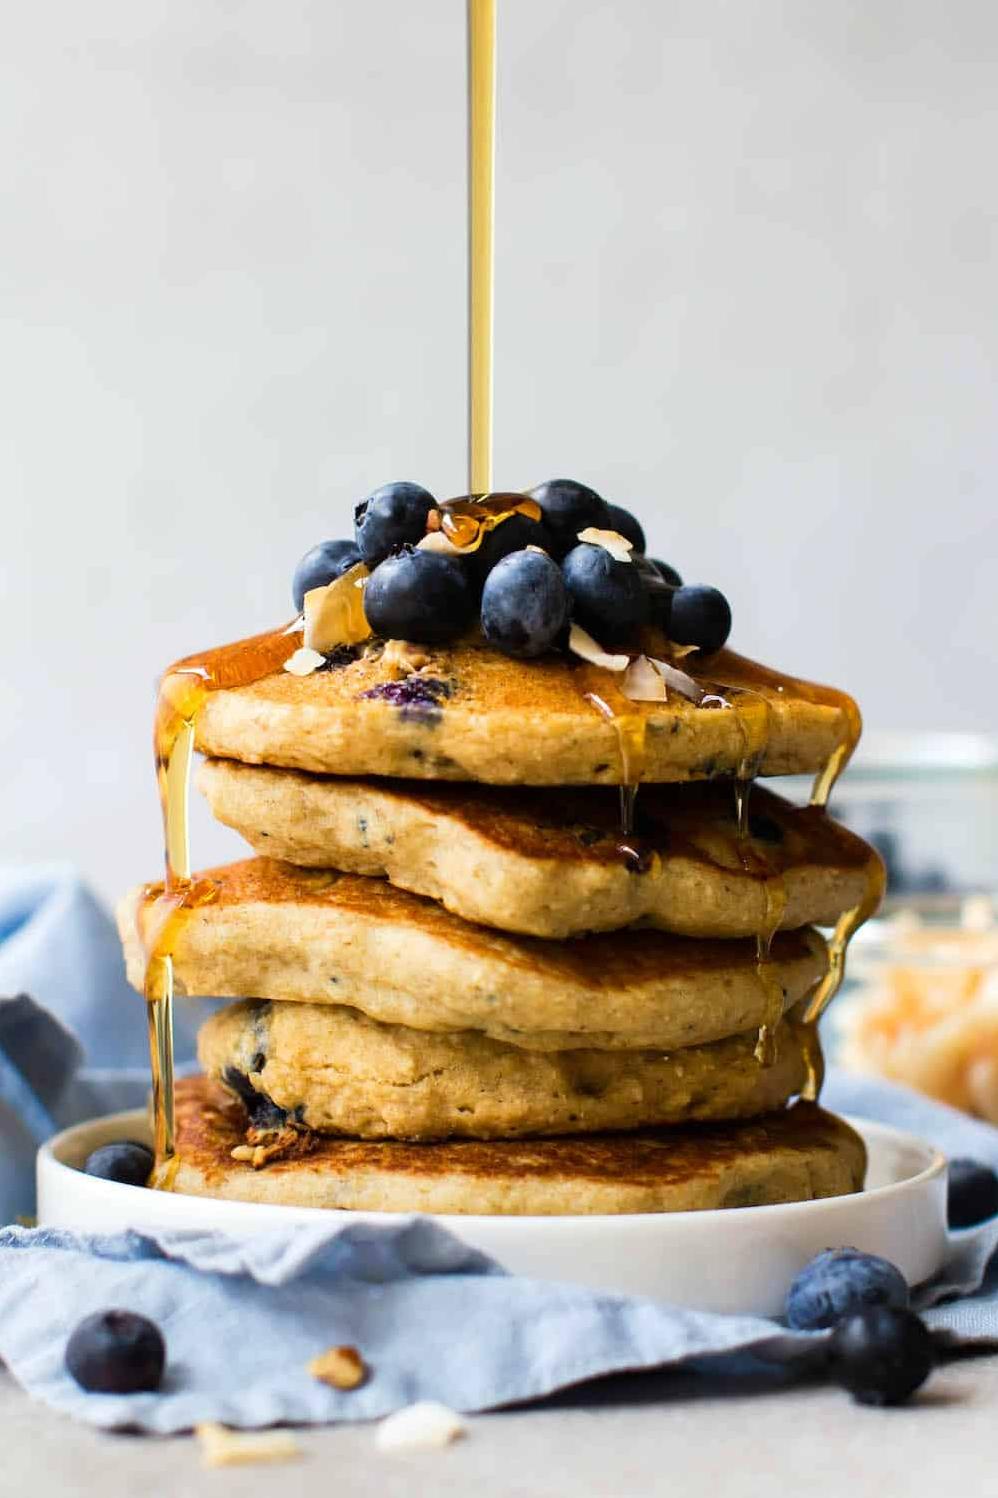  These pancakes are so delicious, you won't even miss the gluten.